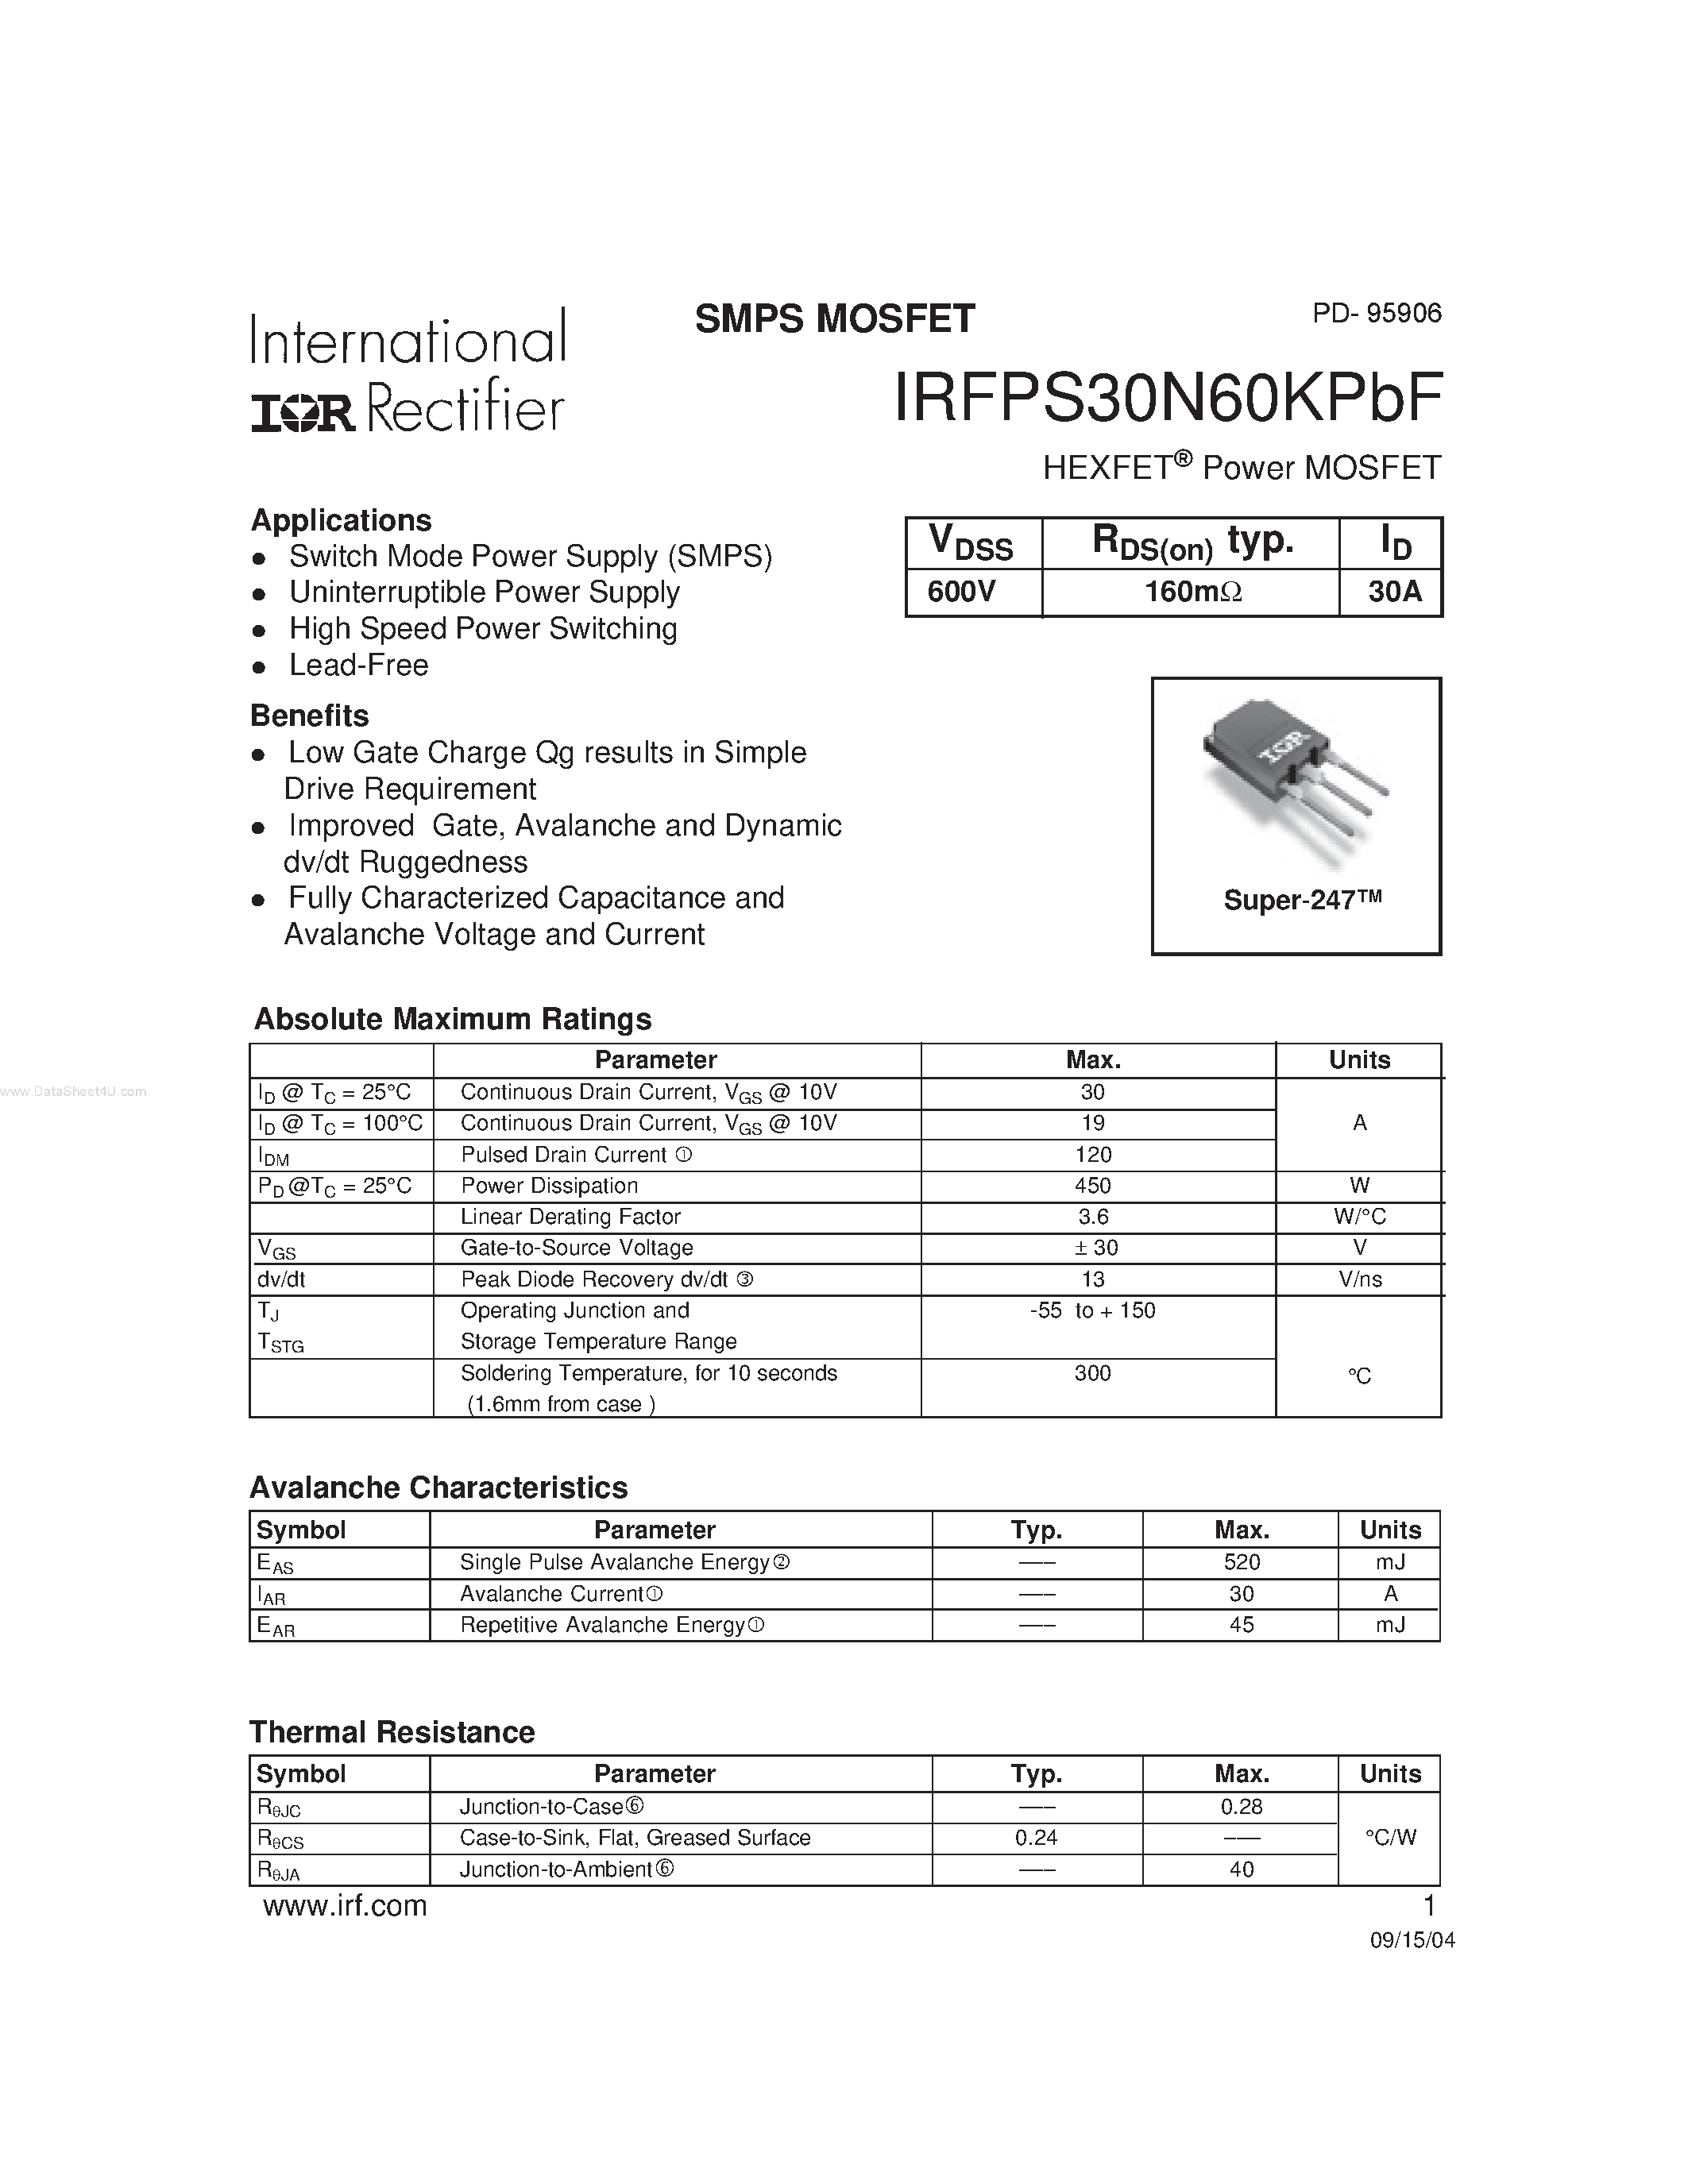 Datasheet IRFPS30N60KPBF - SMPS MOSFET page 1